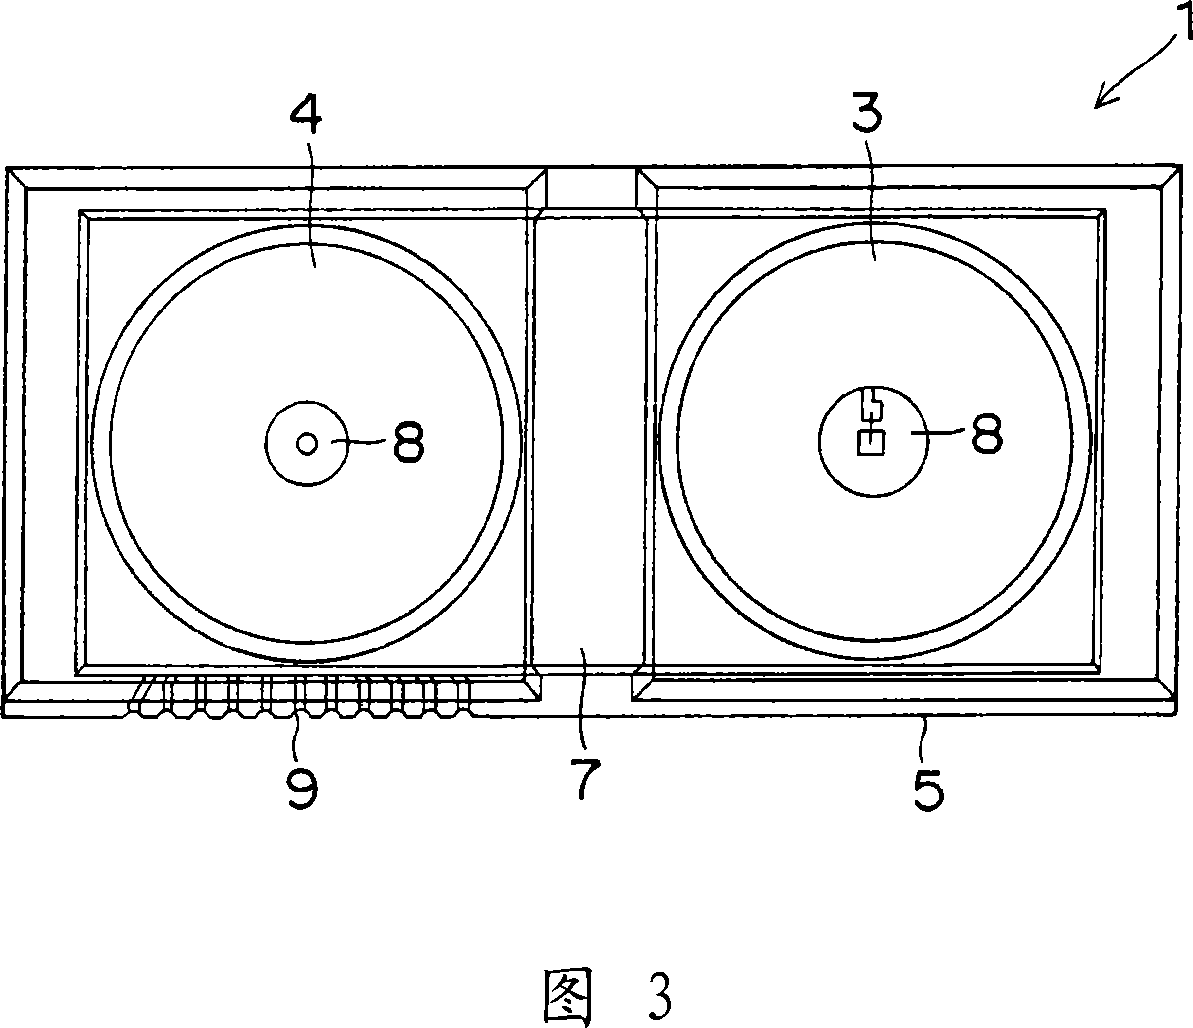 Optical distance measuring device and manufacturing method therefor